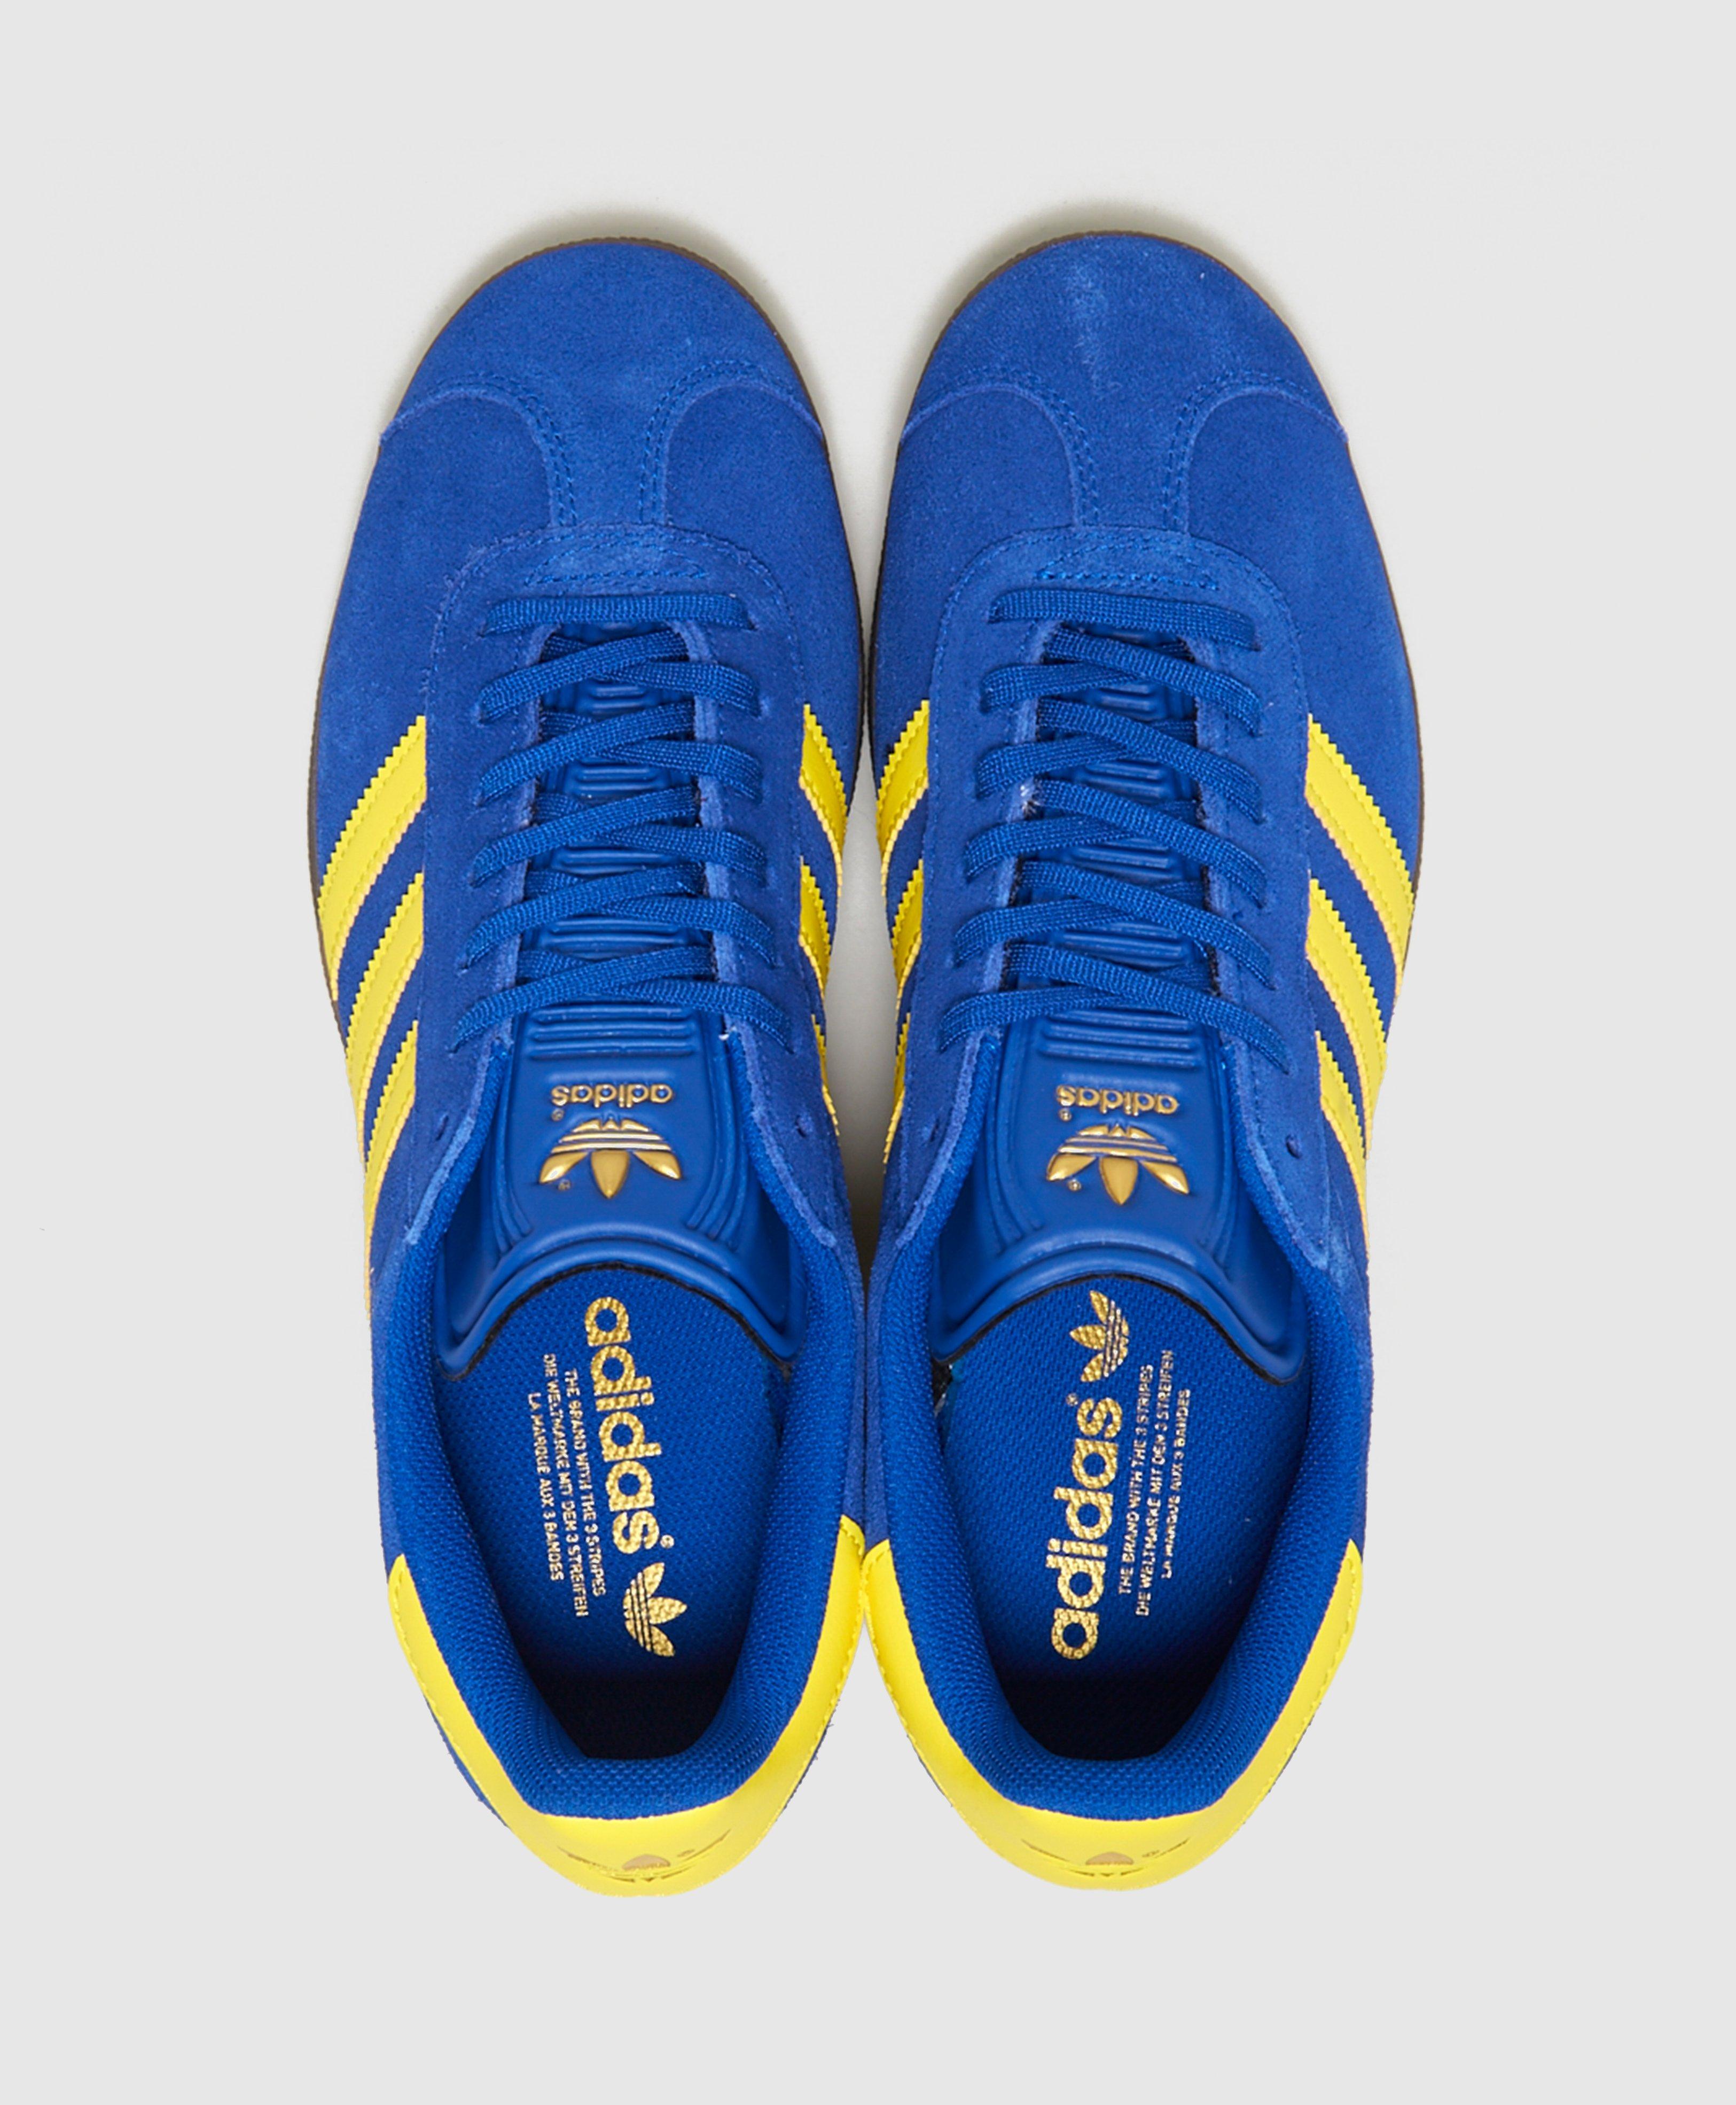 blue and yellow gazelles